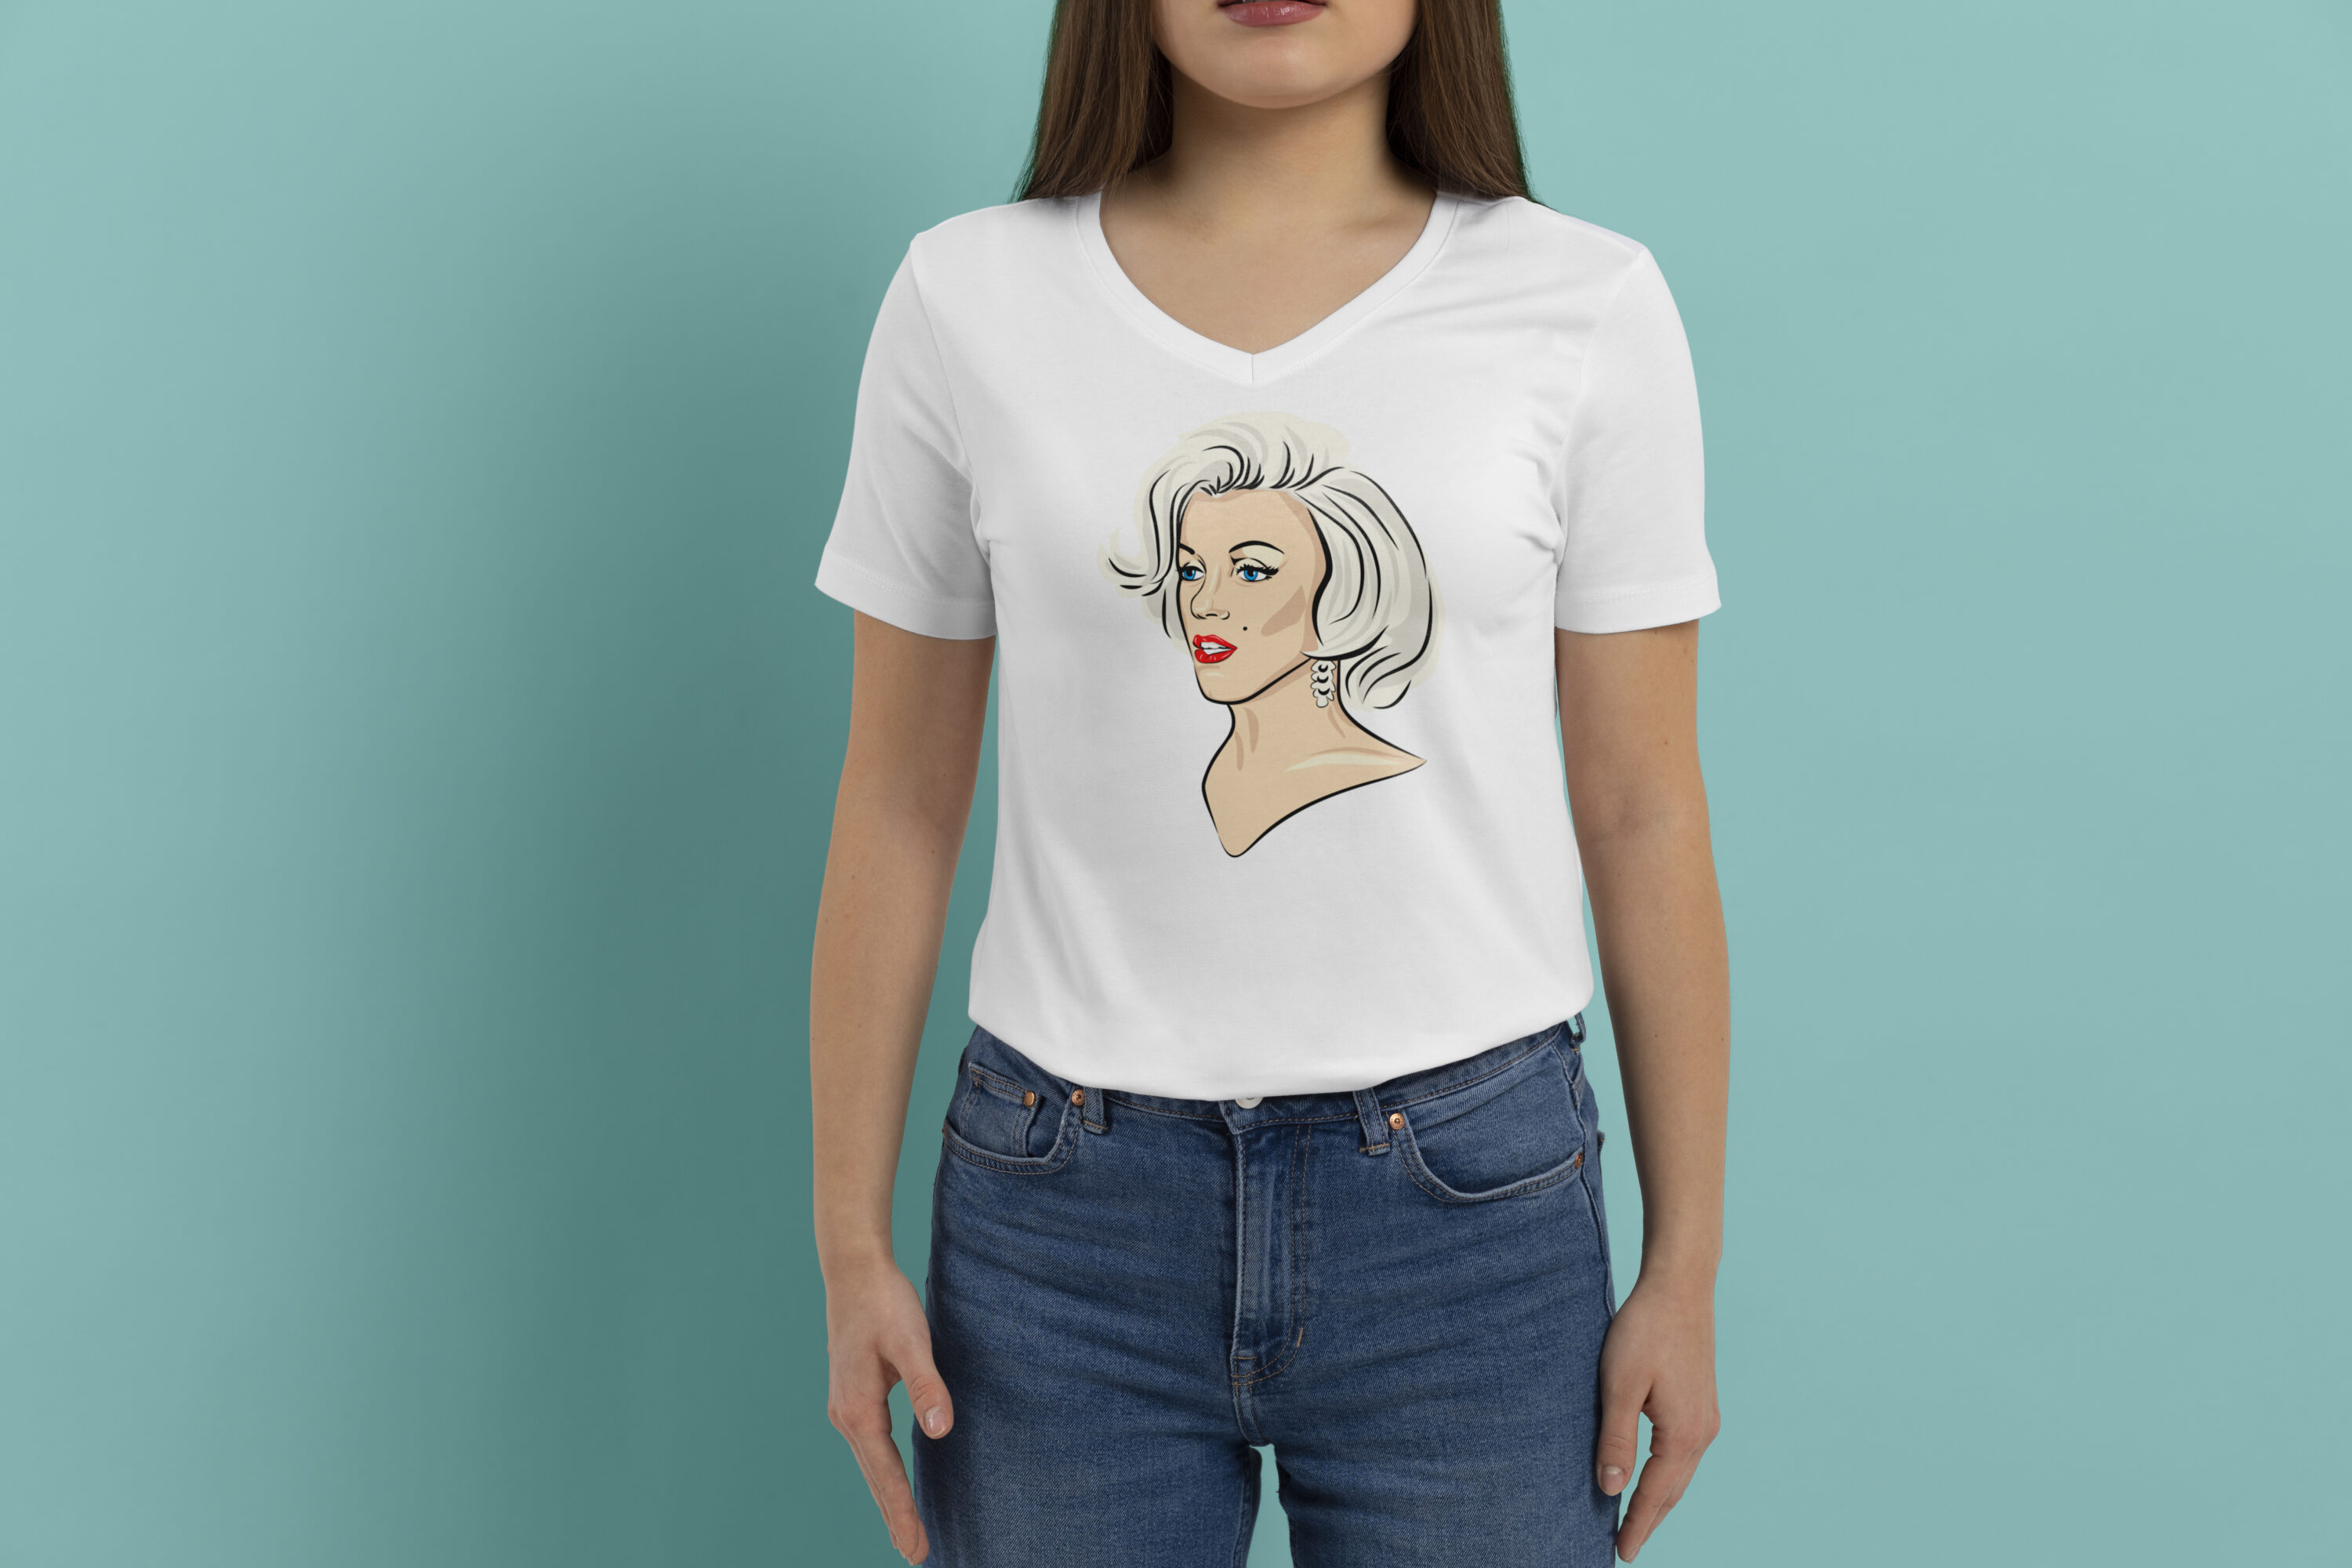 Image of a white t-shirt with an enchanting print of Marilyn Monroe.